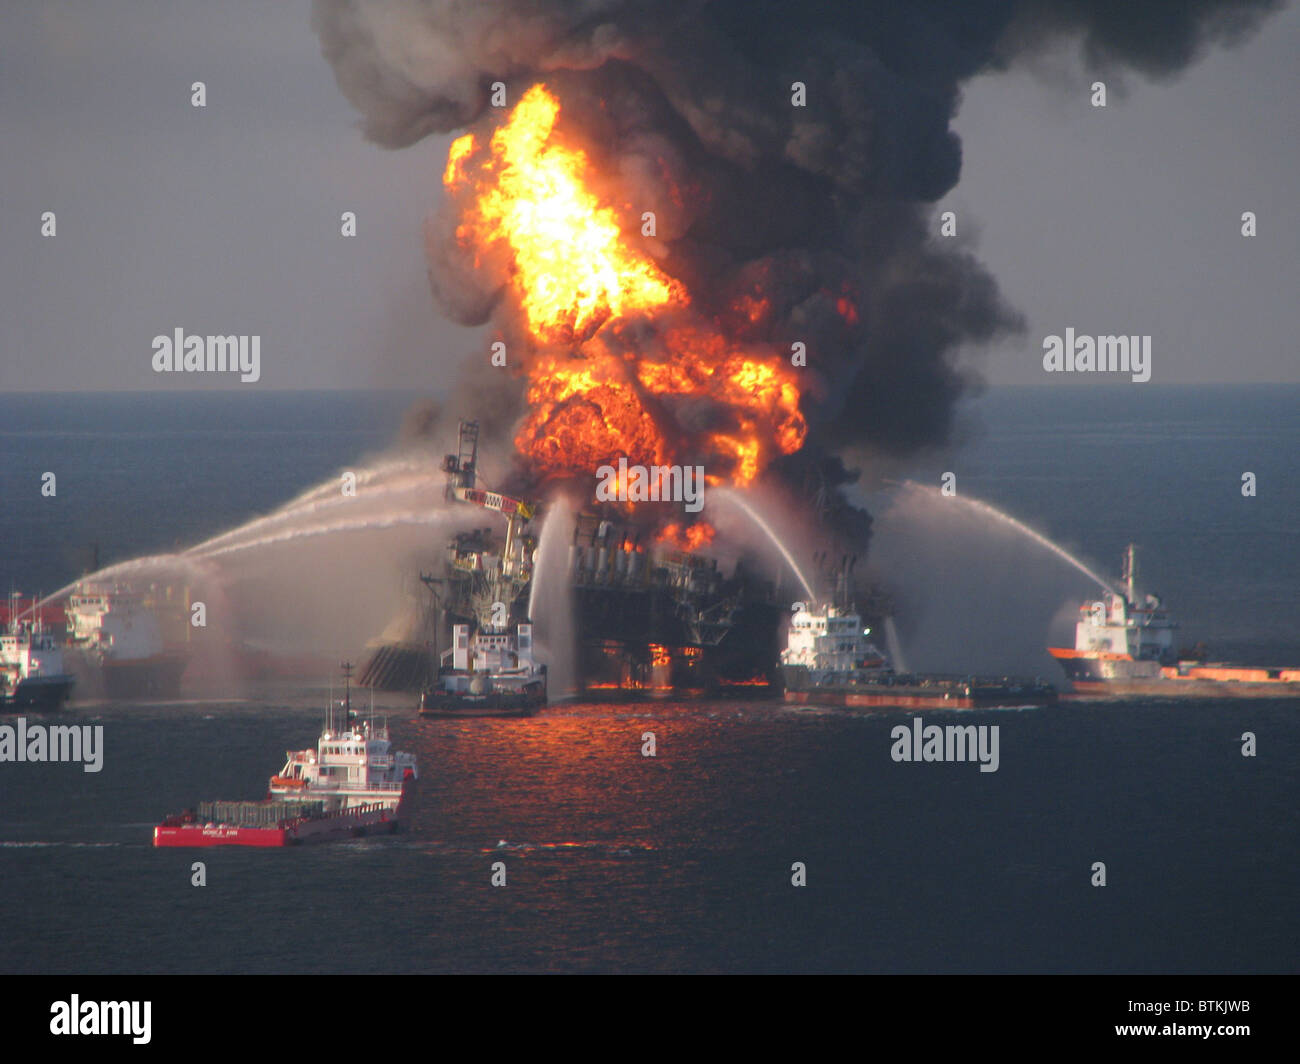 British Petroleum (BP) Oil Company's Deepwater Horizon, the offshore drilling rig is surrounded by U.S. Coast Guard fire boats on April 21, 2010. 11 workers were killed and mile deep gusher polluted the Gulf of Mexico for months. Stock Photo